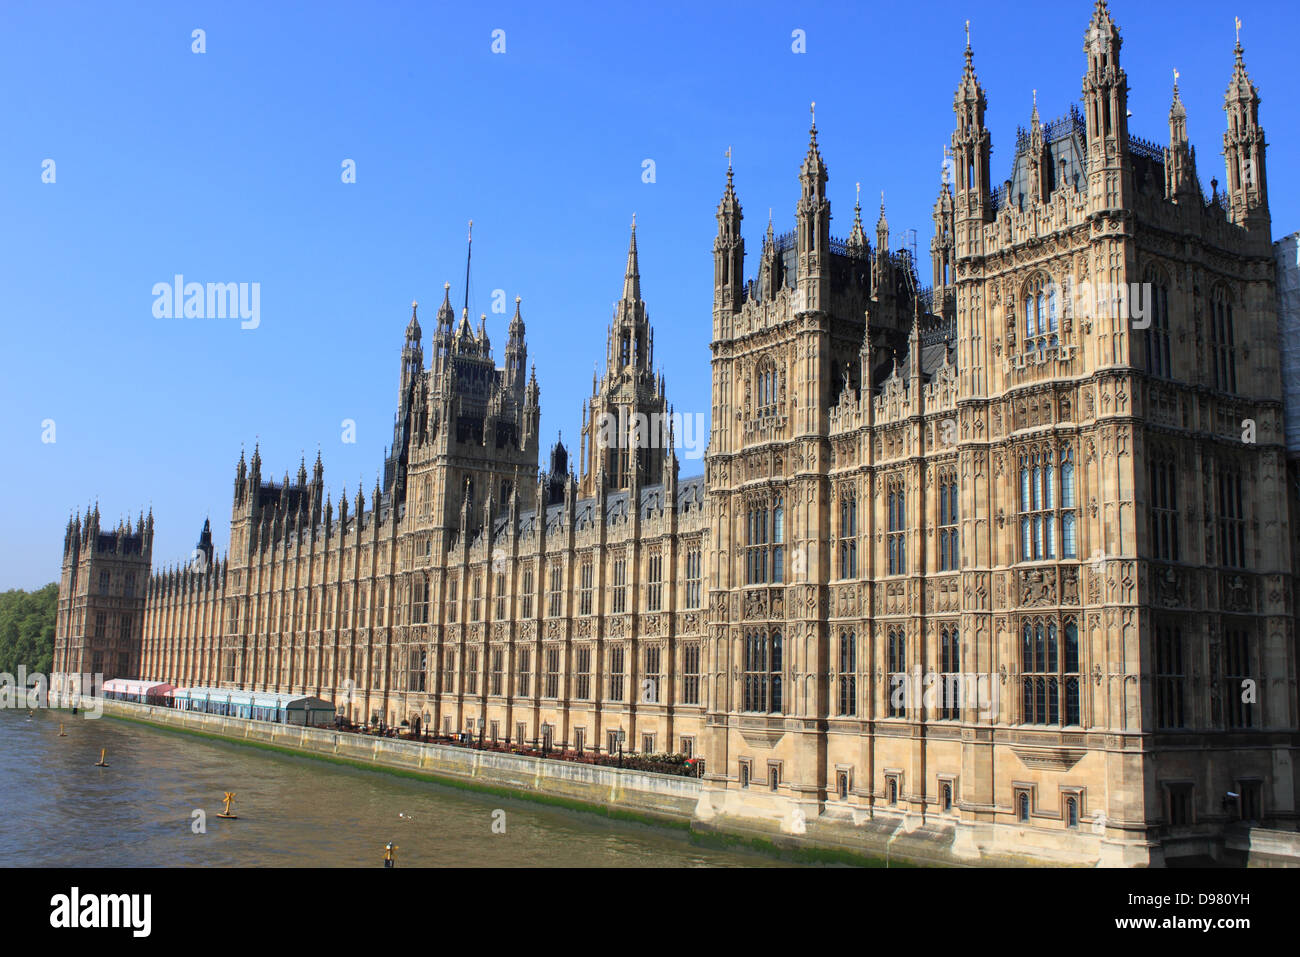 Landscape view of the Houses of Parliament in London, UK Stock Photo